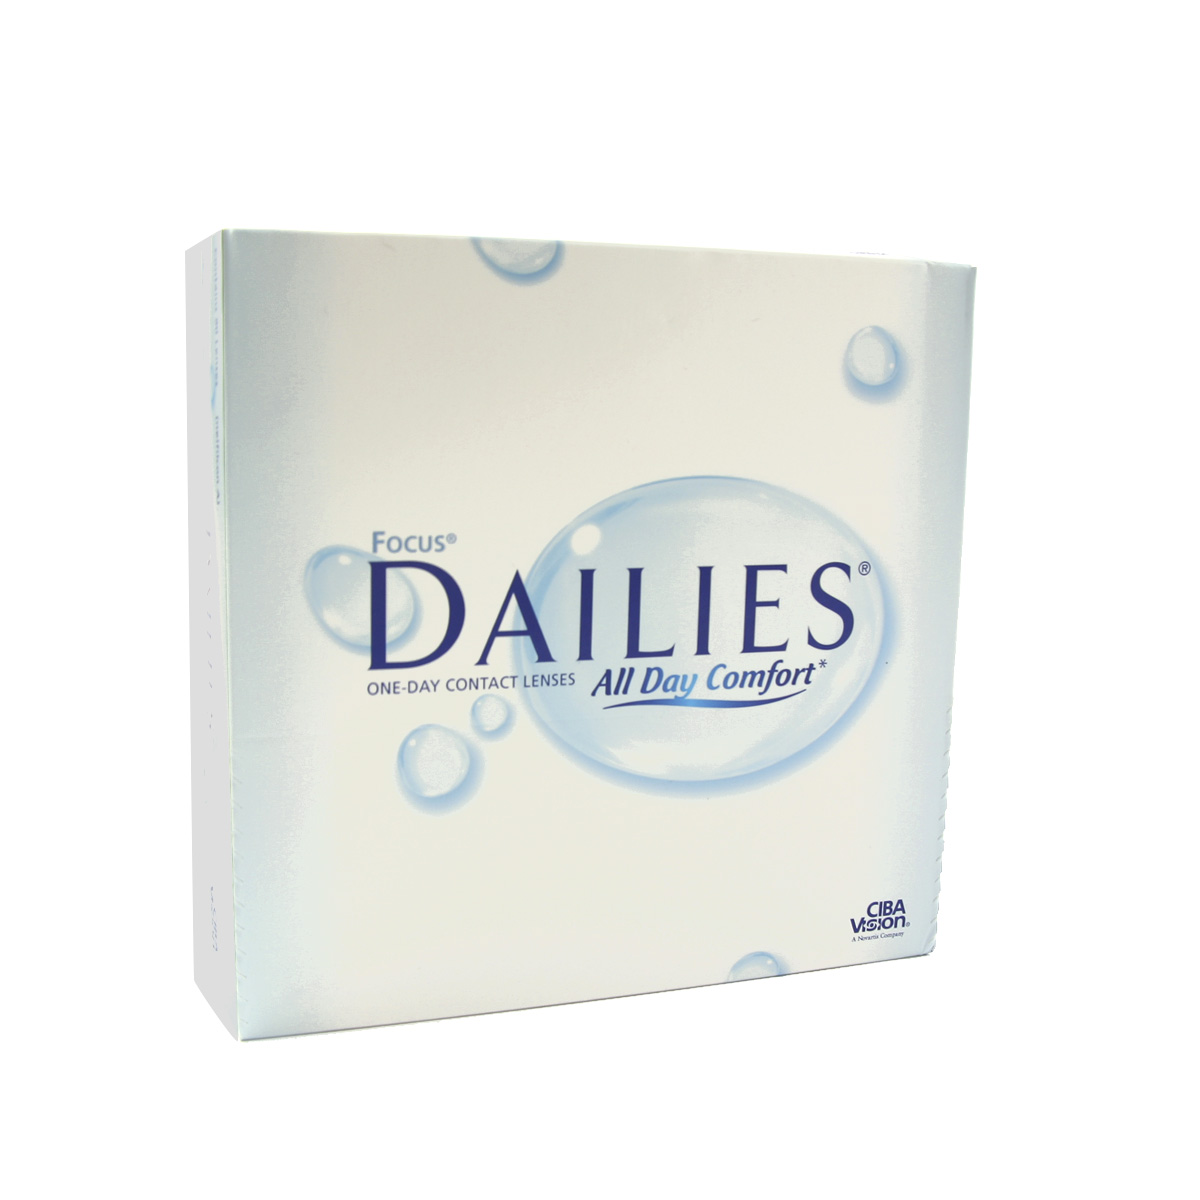 Image of Focus Dailies All Day Comfort 90 lenses